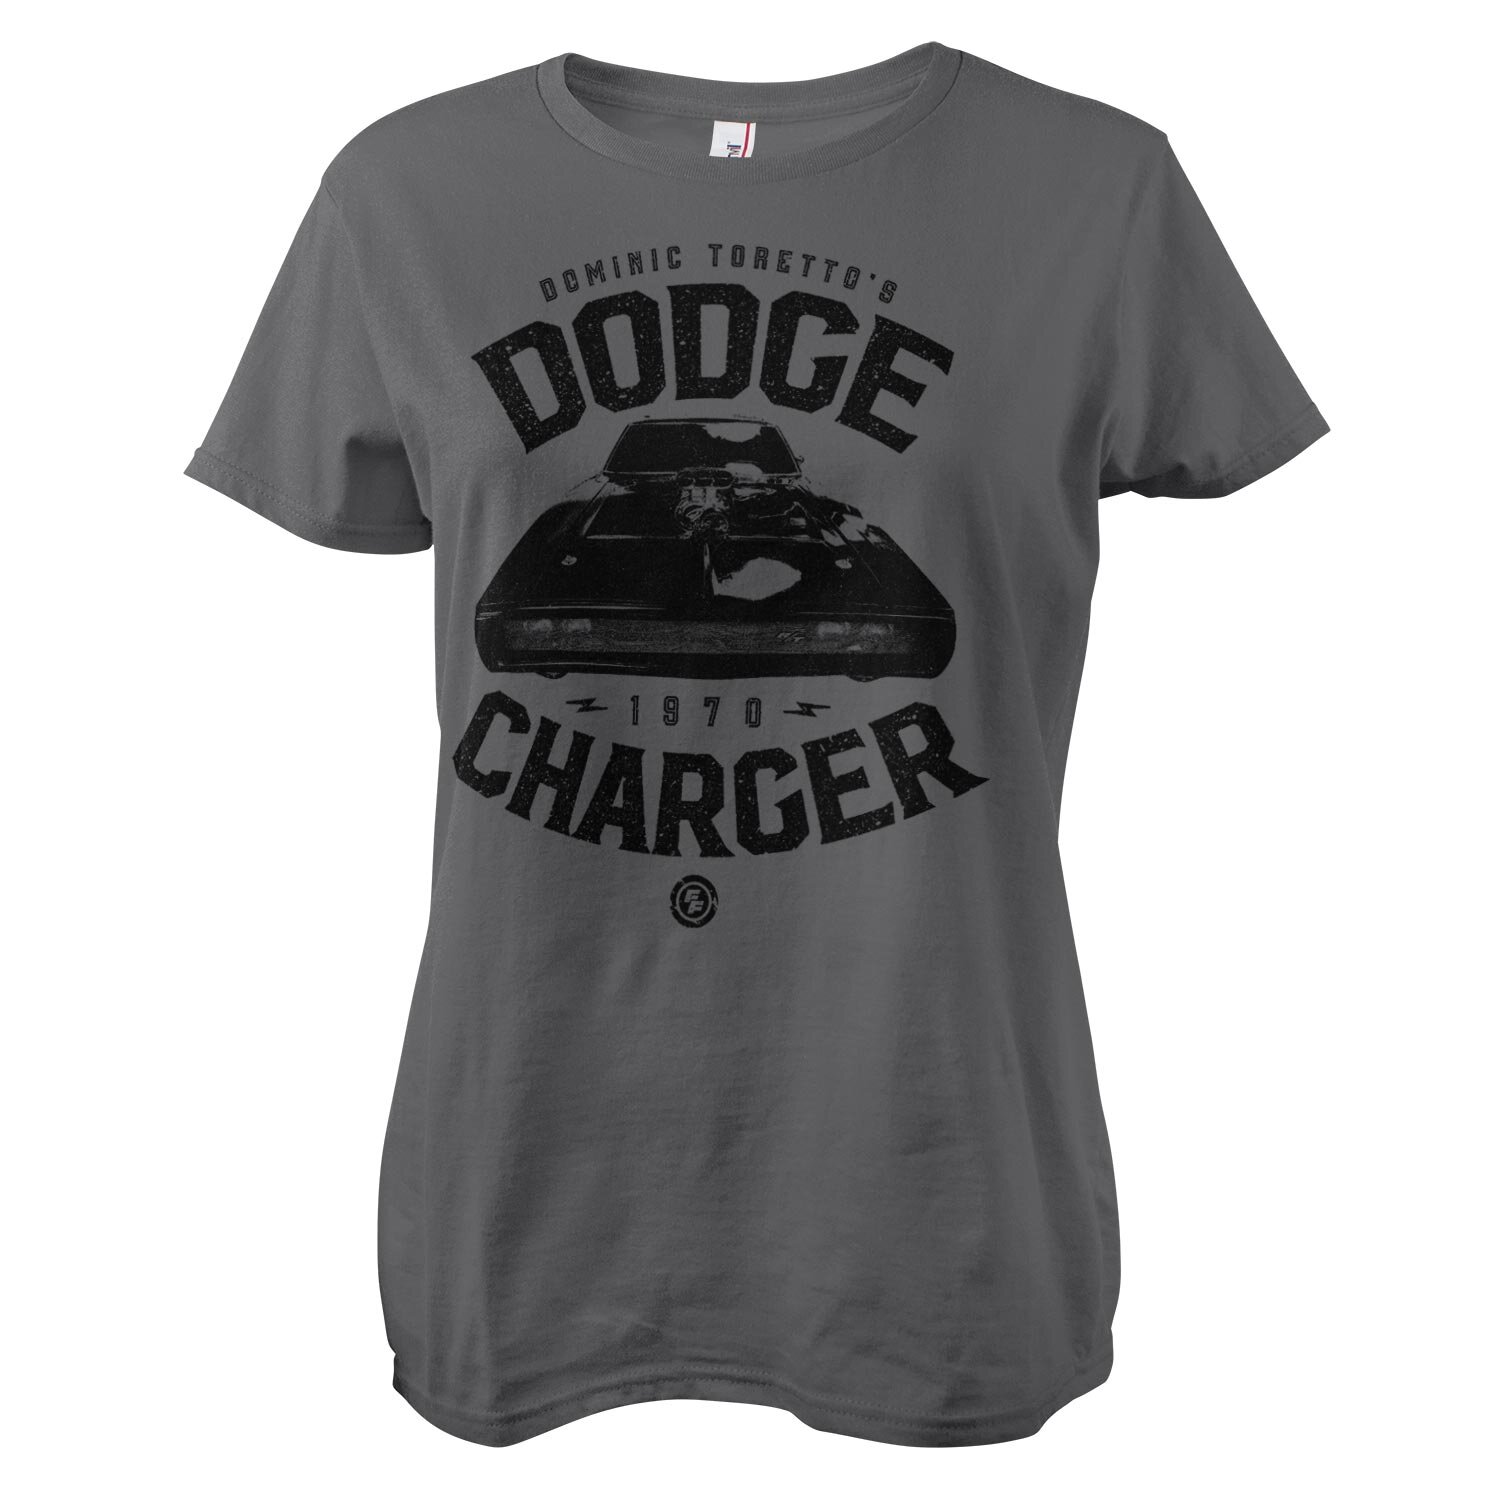 Toretto's Dodge Charger Girly Tee